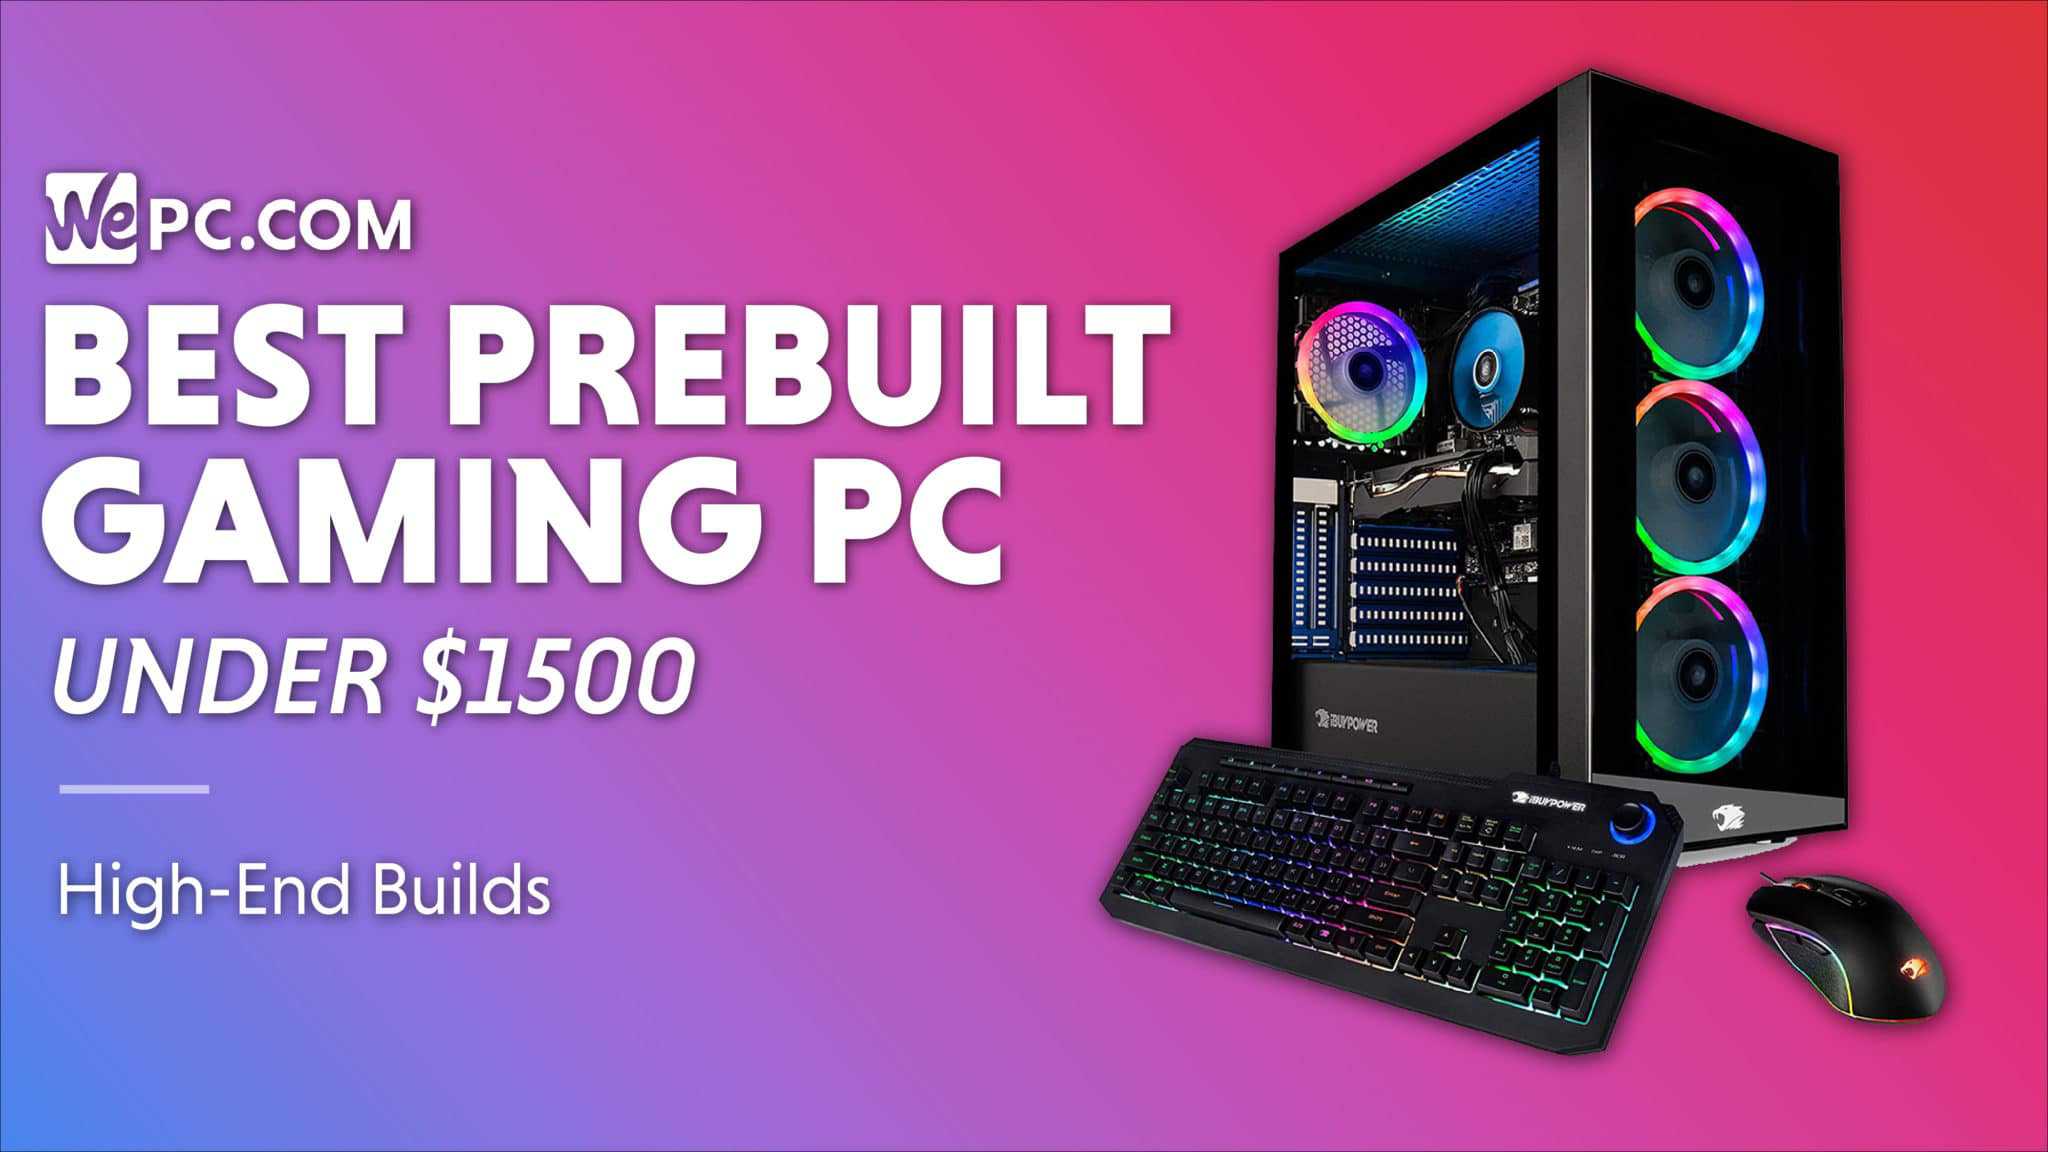 Minimalist Building Your Own Gaming Pc 2021 for Small Room